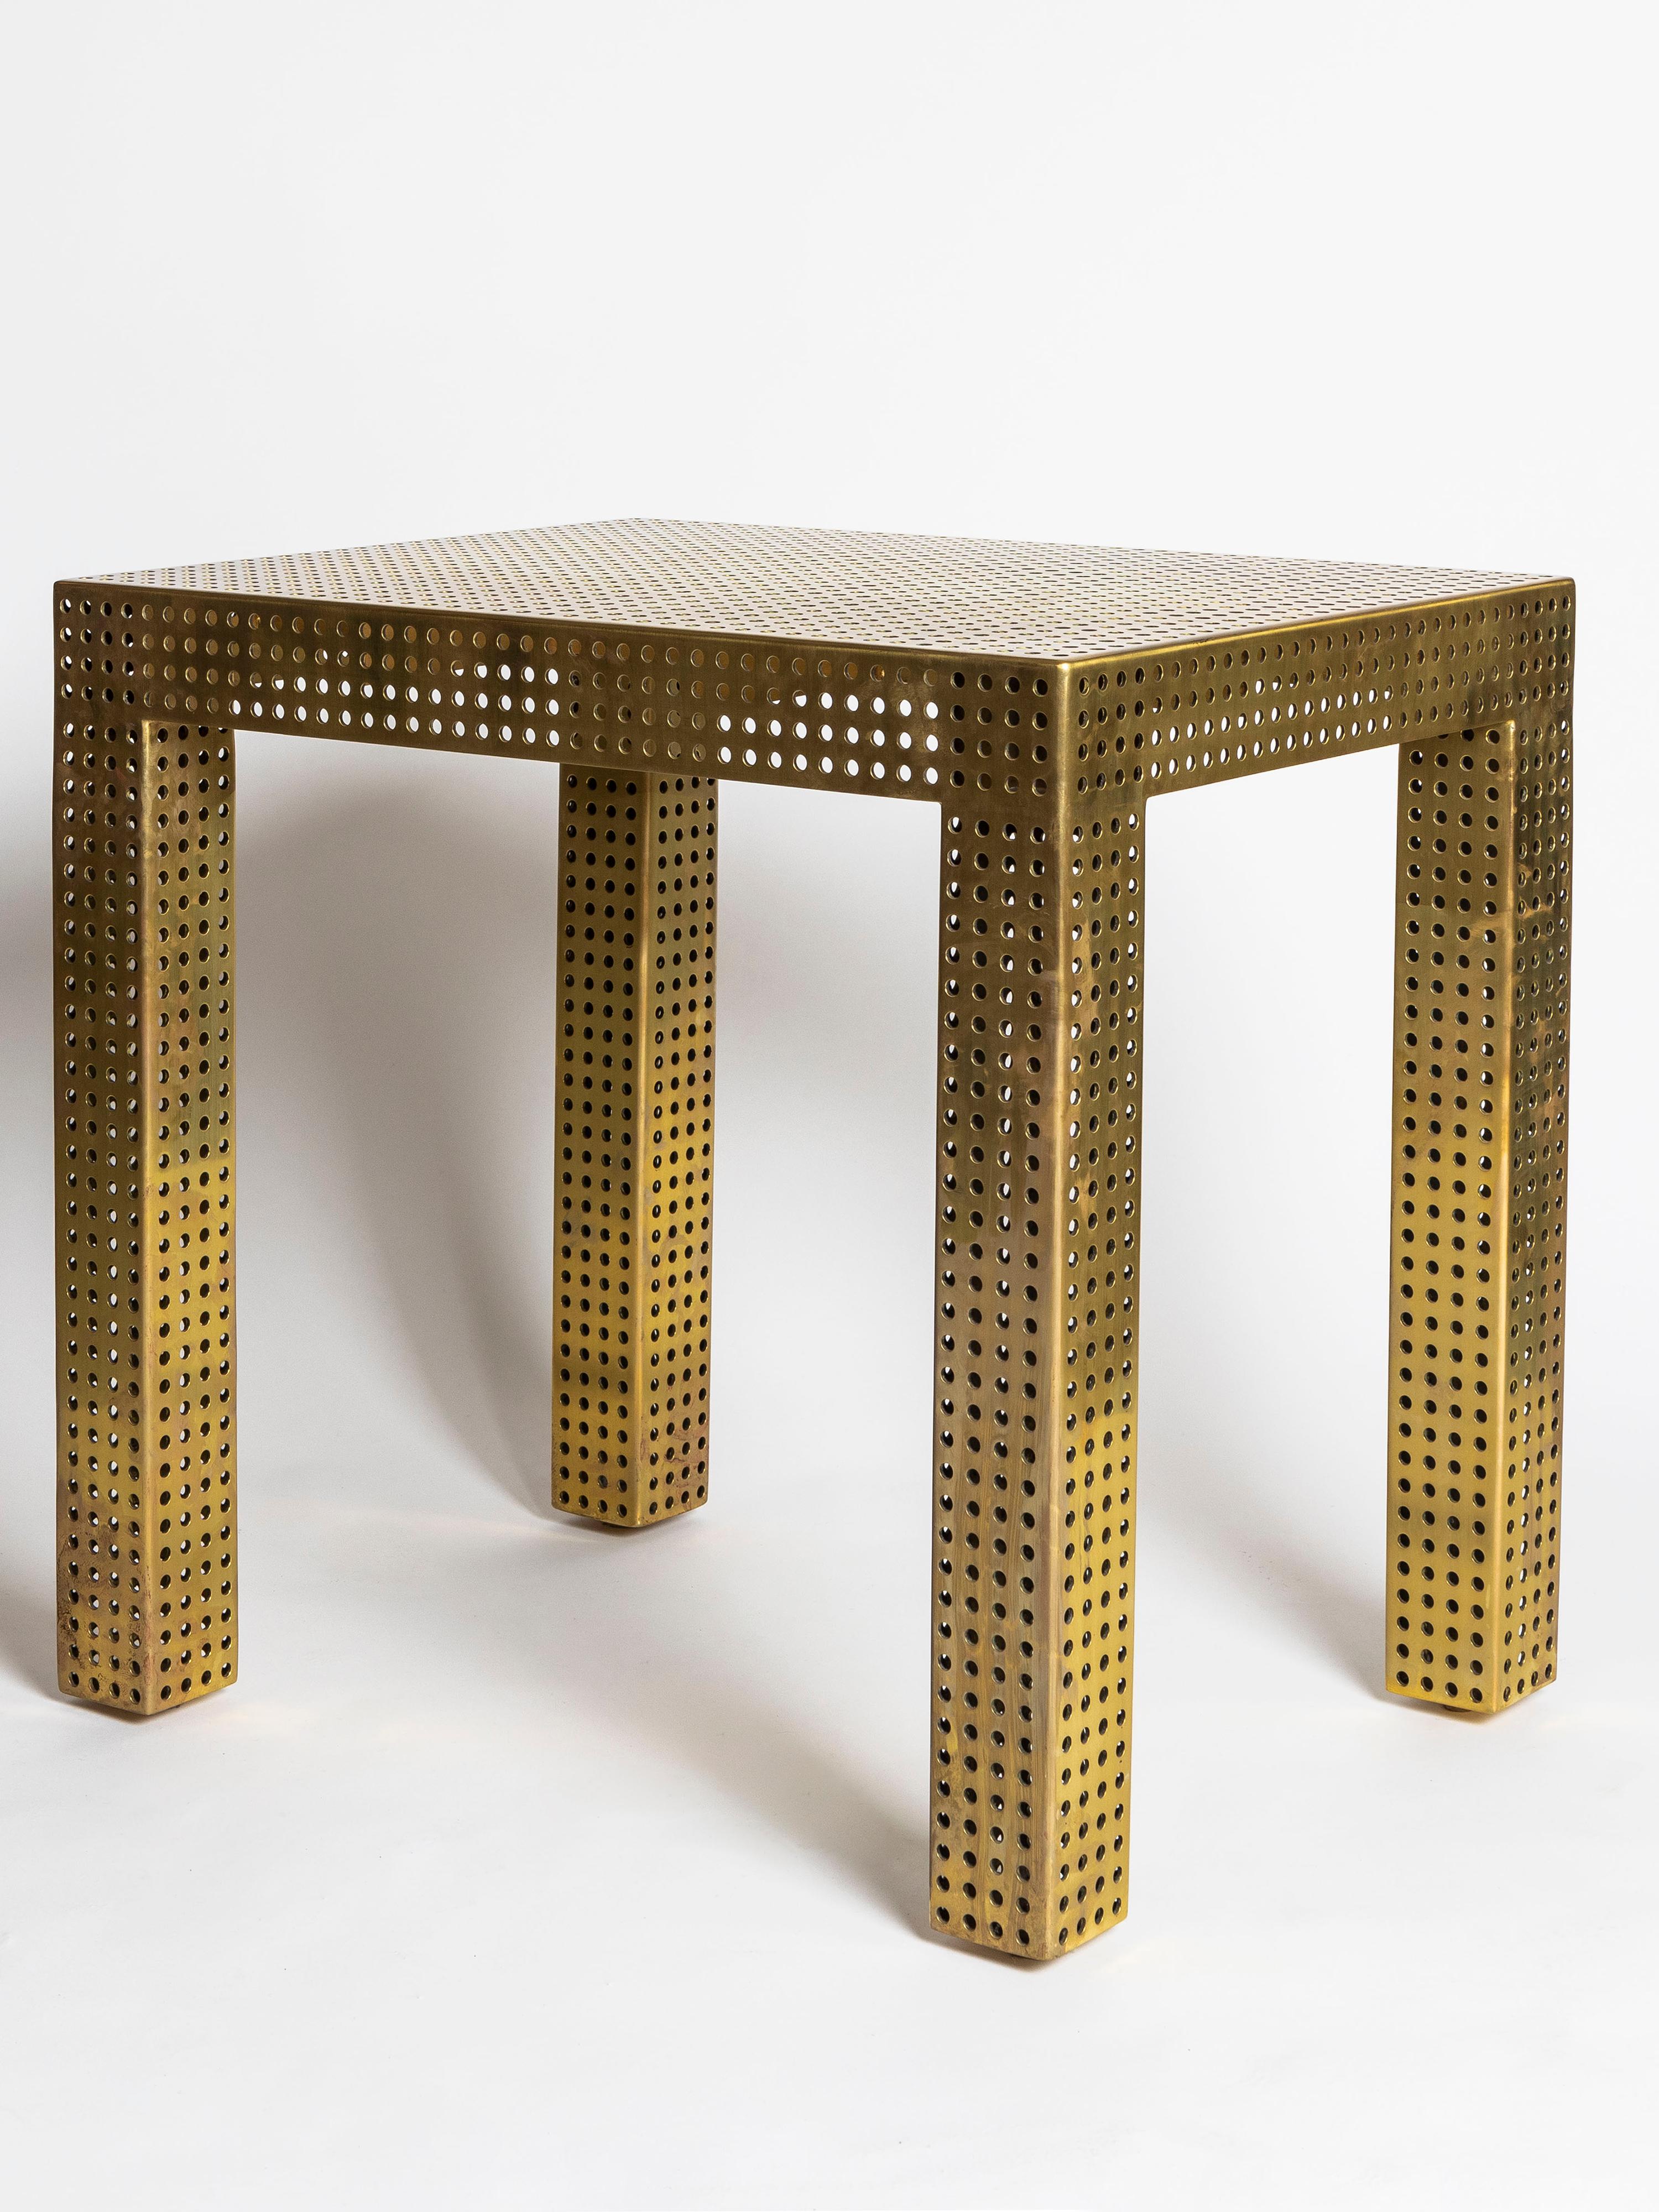 Custom made perforated burnished brass console or side table by Kelly Wearstler. This take on the Classic Parsons table references the style of Mathieu Matégot, appealing to contemporary and Mid-Century Modern fans alike.